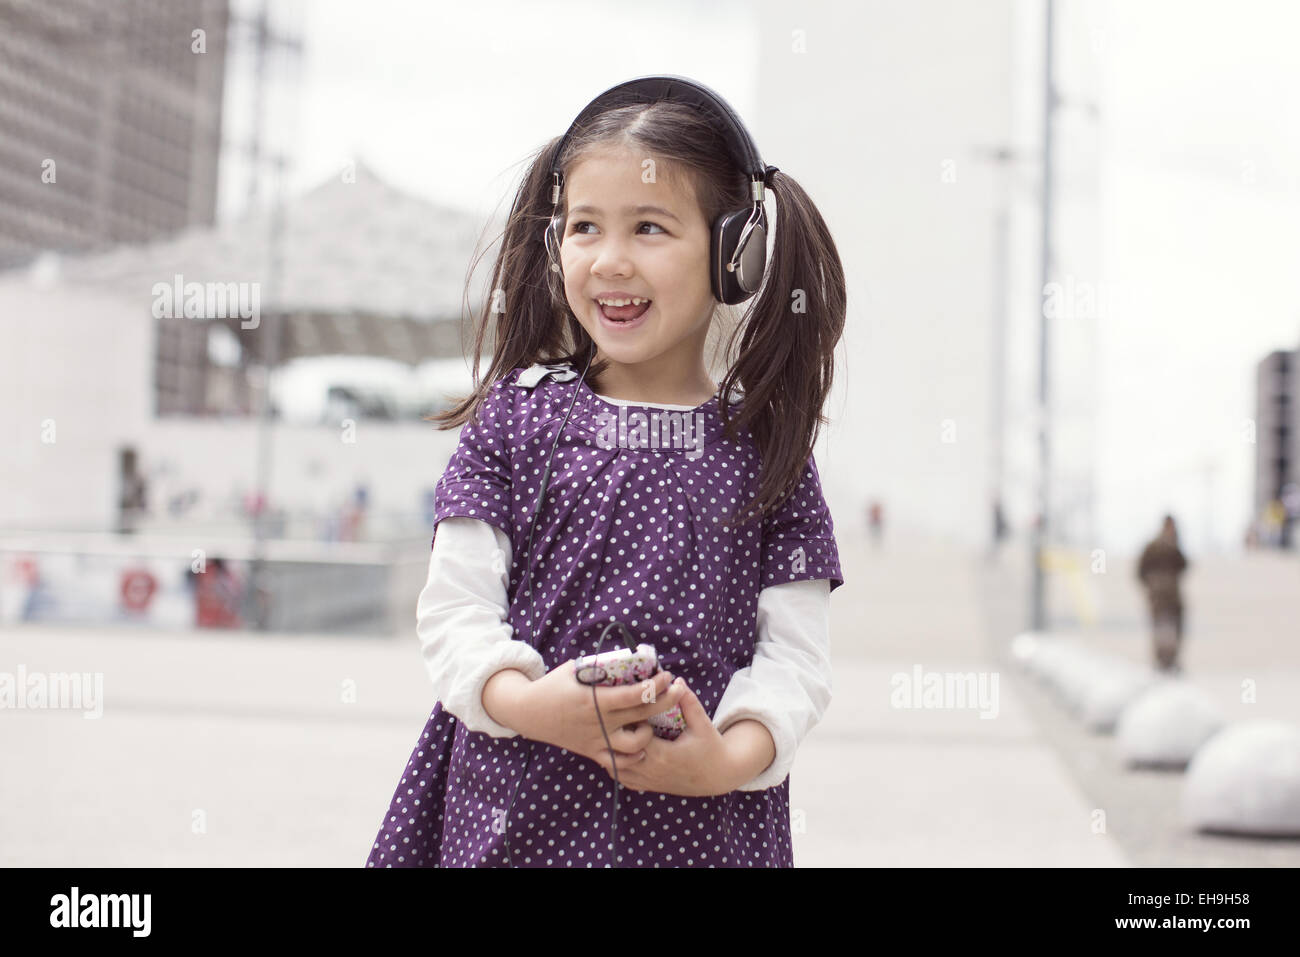 Girl listening to headphones and singing outdoors Stock Photo